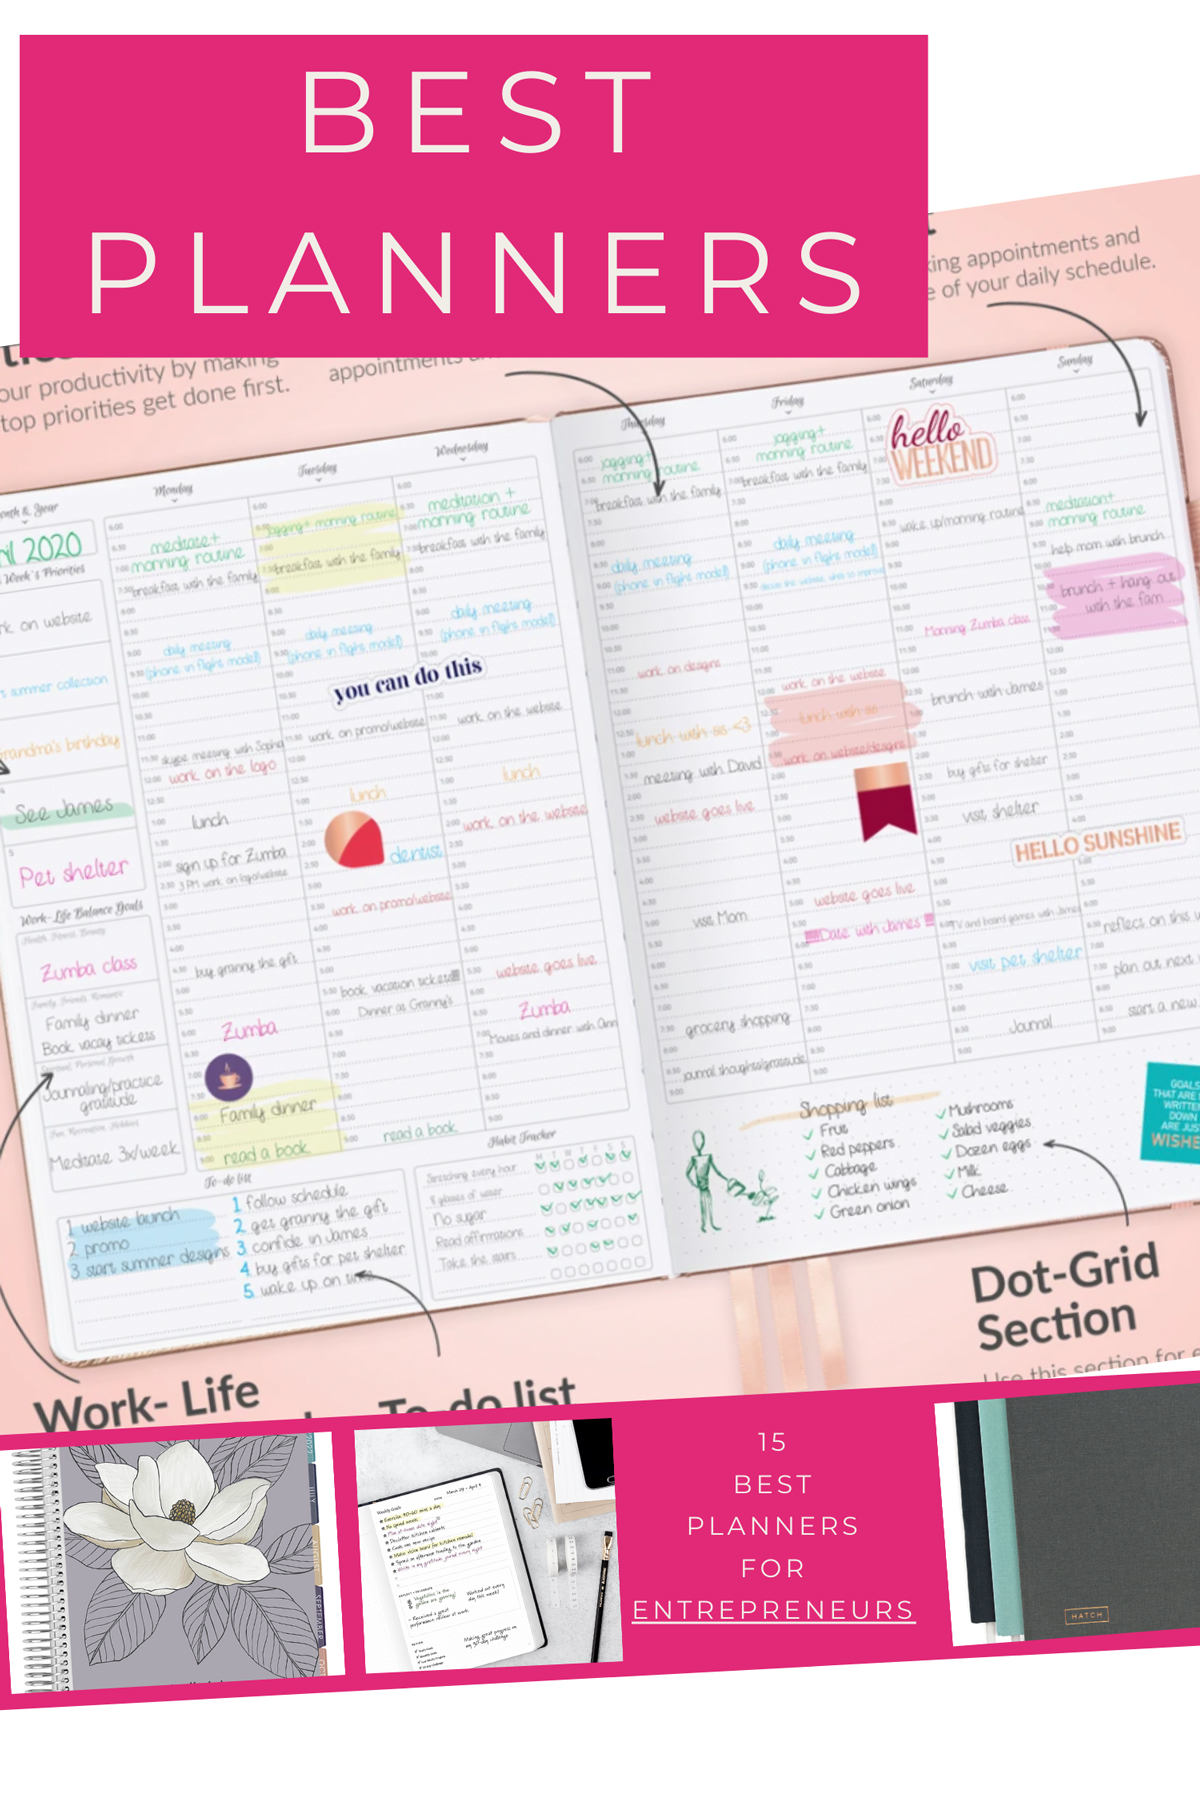 What makes a good paper planner?